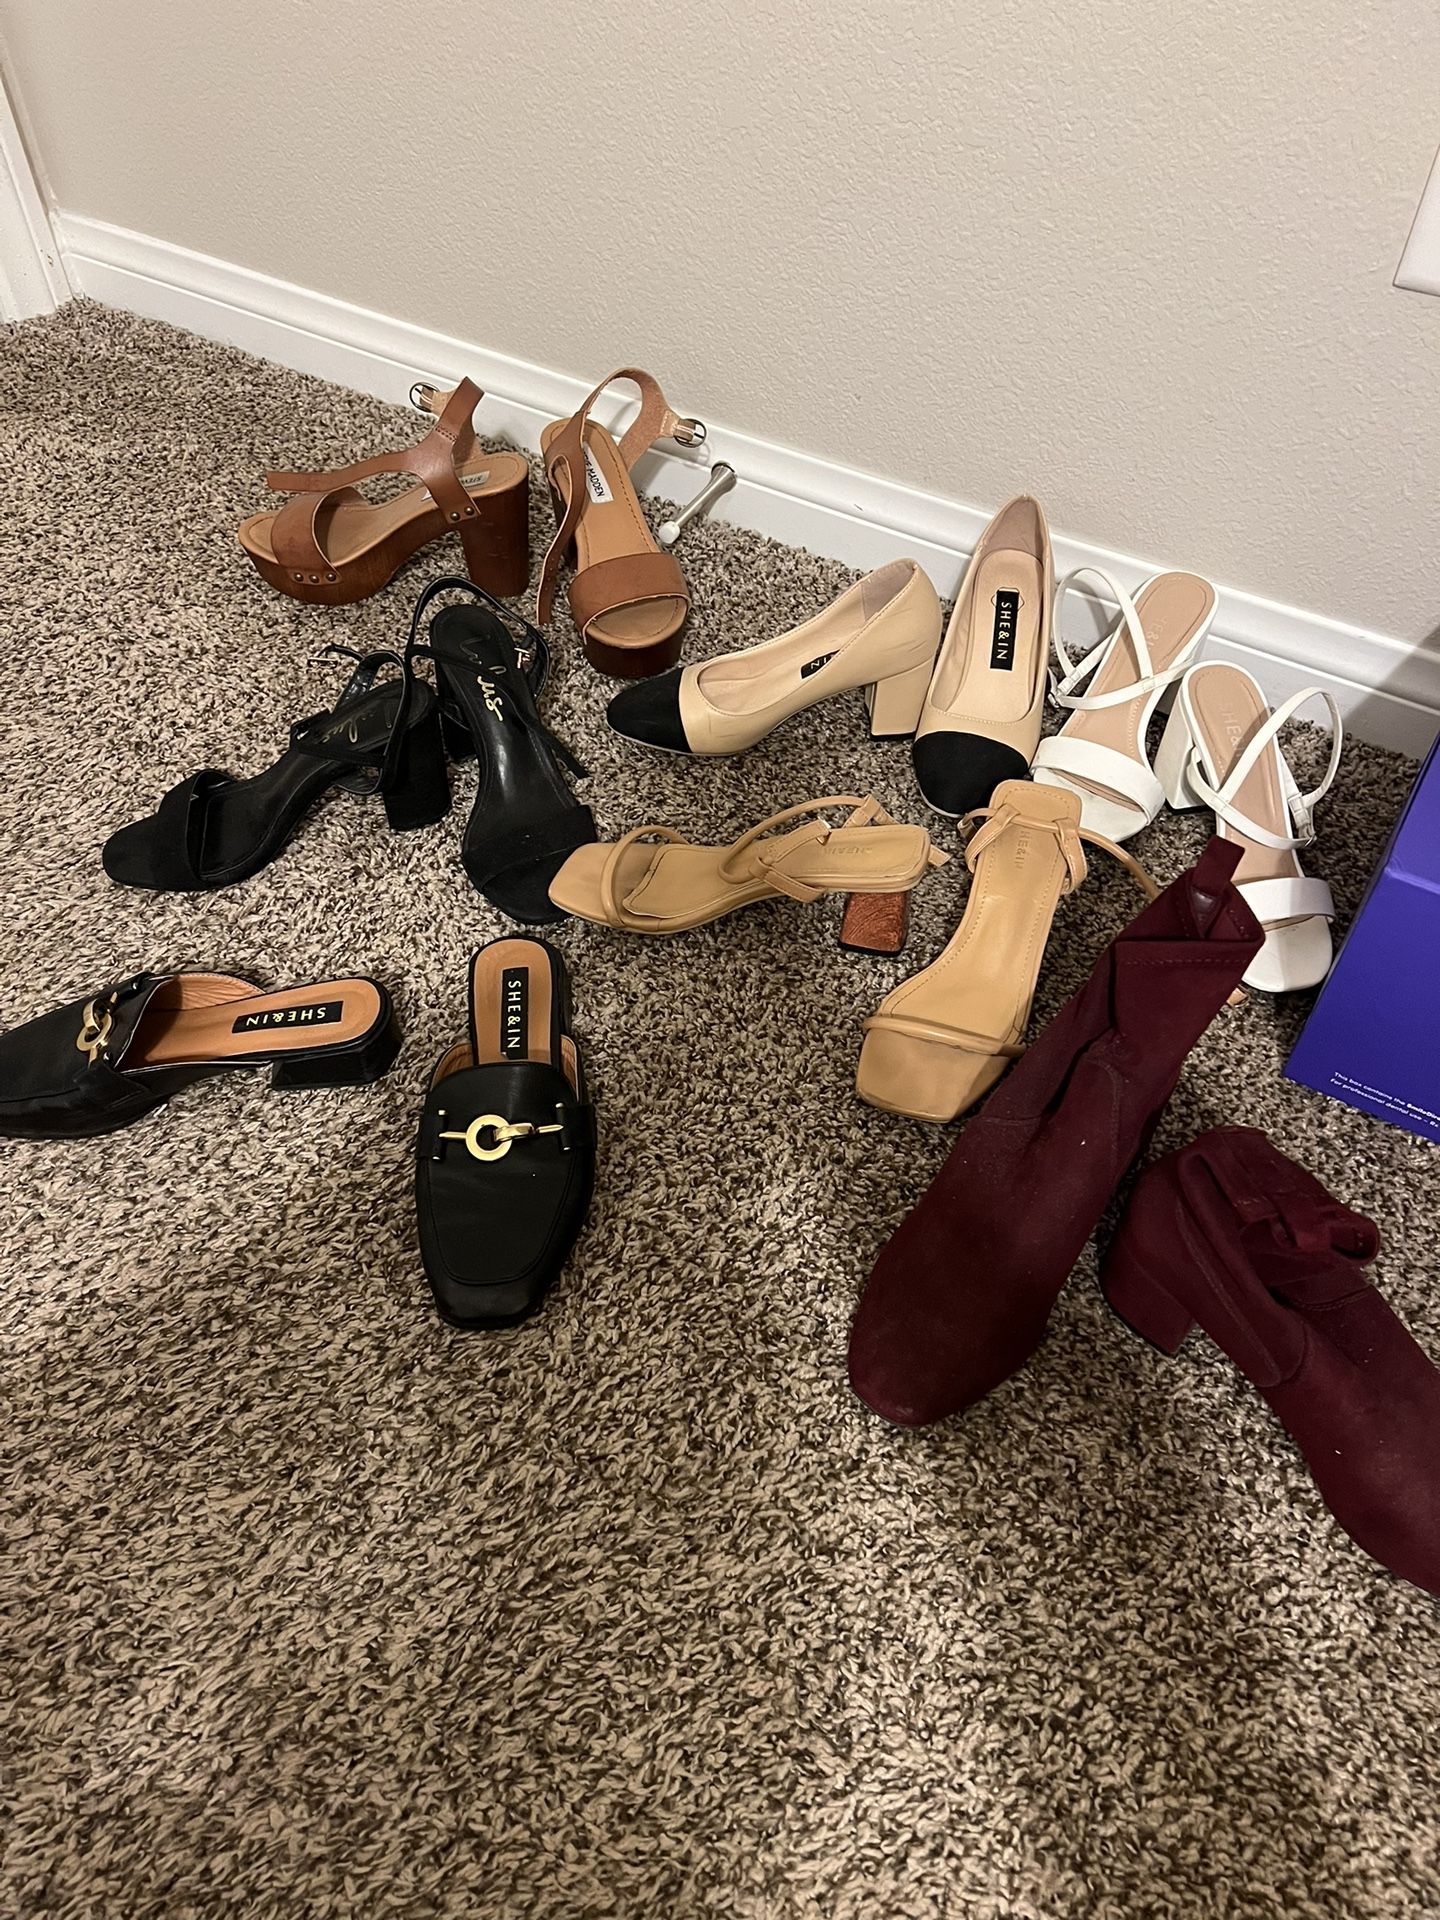 Heels 5.5 Steve Madden, Lulus And More - Very Good Condition